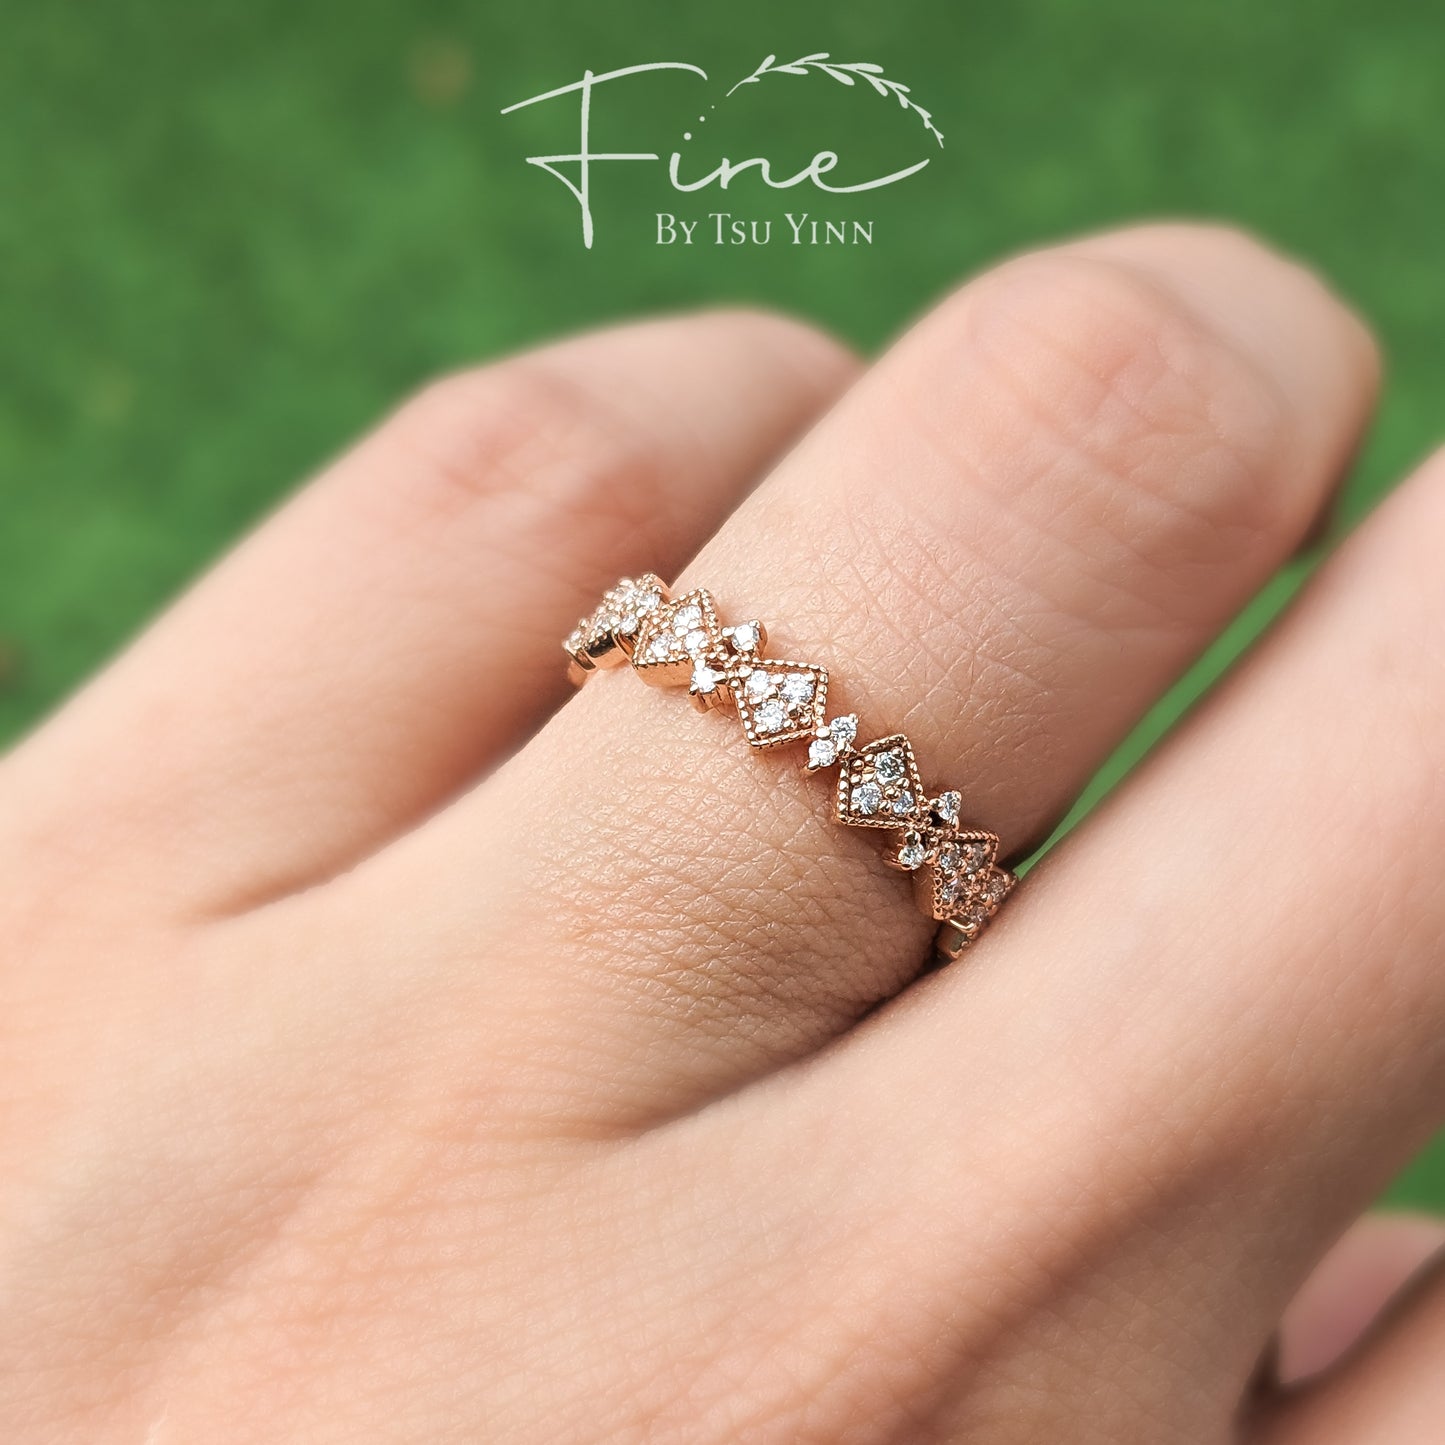 FBTY Ling (Eternity Band)